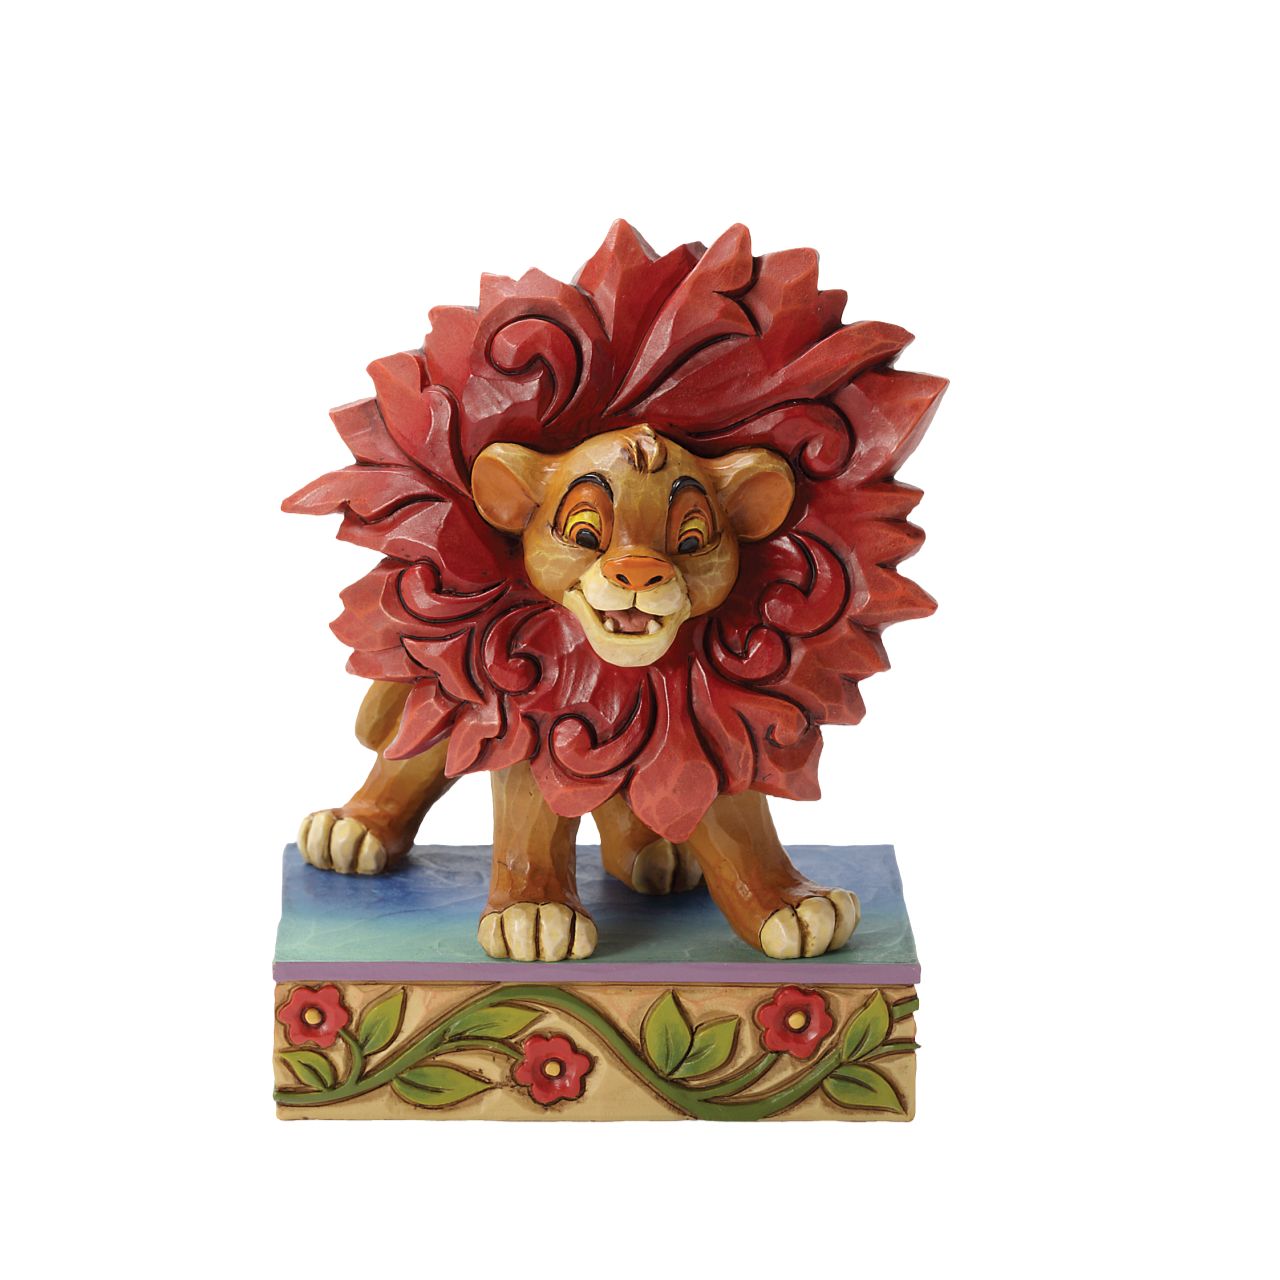 Jim Shore Disney Just Can't Wait To Be King Simba Figurine  Presented for the first time in Disney Traditions, Simba from Disney's The Lion King. Designed by award winning artist and sculptor, Jim Shore. This figurine is made from cast stone. Packed in a branded gift box